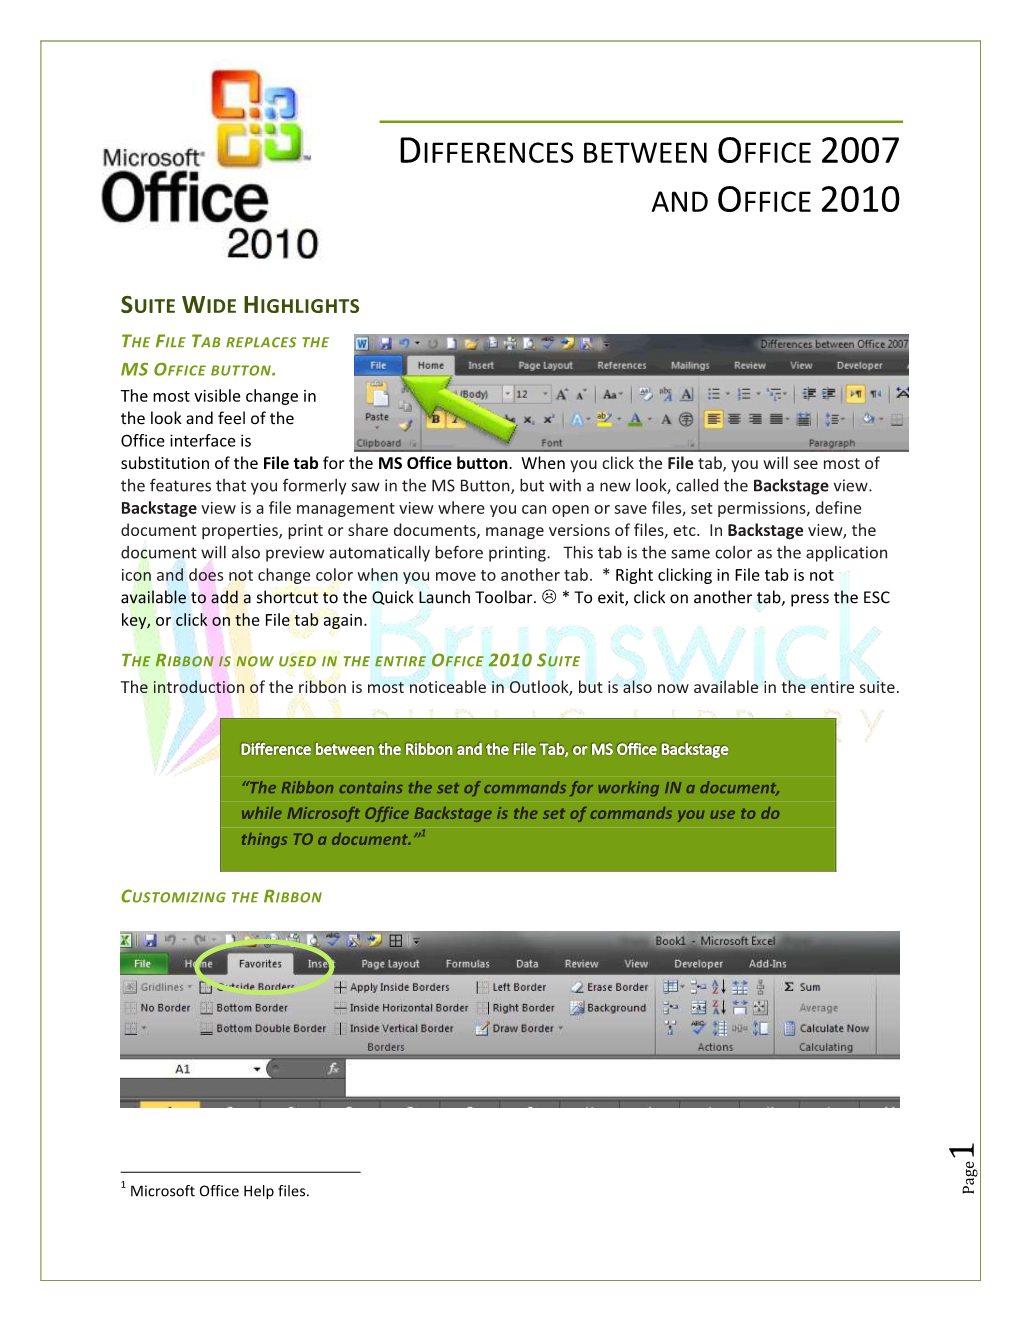 Differences Between Office 2007 and Office 2010